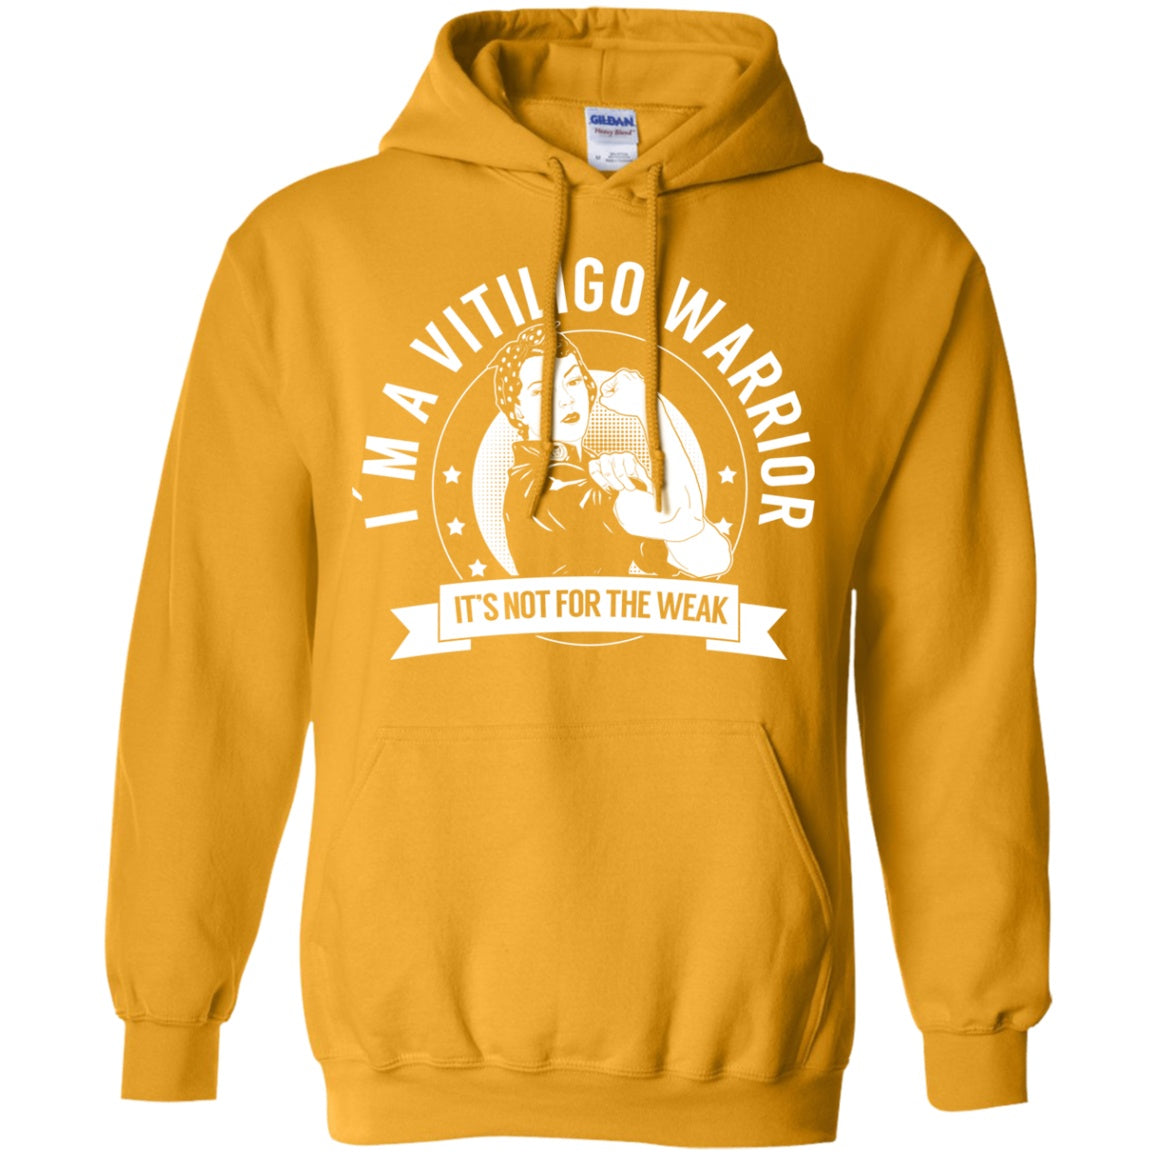 Vitiligo Warrior NFTW Pullover Hoodie 8 oz. - The Unchargeables